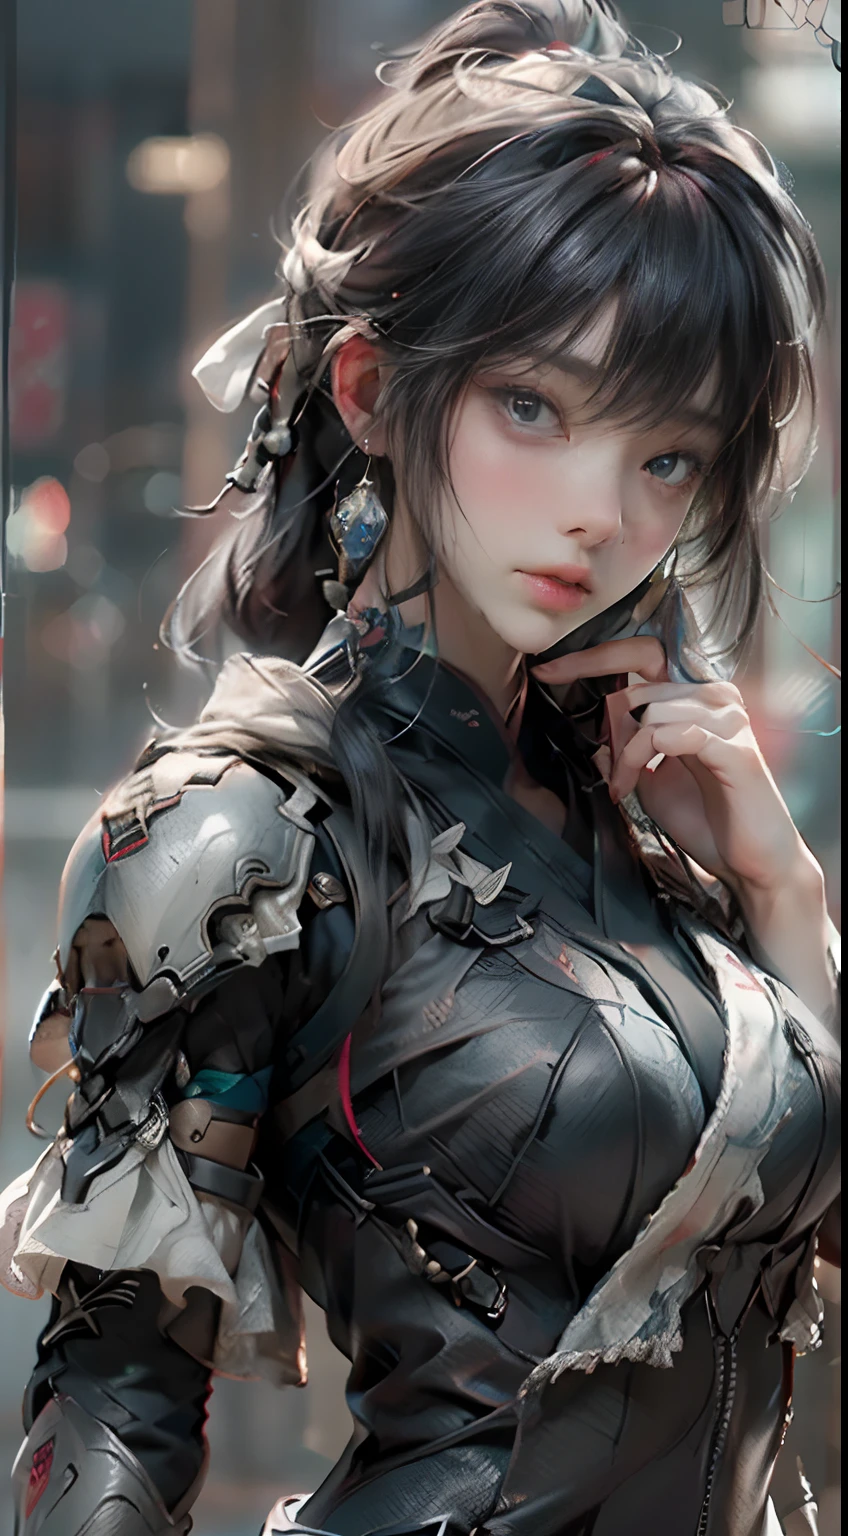 ((Best Quality)), ((masutepiece)), (detail: 1.4), 3D, Beautiful Japan female figure, nffsw (High dynamic range), Ninja attire, satin, Ray tracing, NVIDIA RTX, Hyper-Resolution, Unreal 5, Subsurface scattering, PBR Textures, Post-processing, Anisotropy Filtering, depth of fields, Maximum Sharpness and Clarity, Multilayer Texture, Albedo and Highlight Maps, Surface Shading, accurate simulation of light and material interactions, Perfect proportions, Octane Render, bi-color light, Large aperture, Low ISO, White Balance, thirds rule, 8K Raw, finger detailing, refined facial features, Focus on the face、A dark-haired、Red ribbons、hand armor、